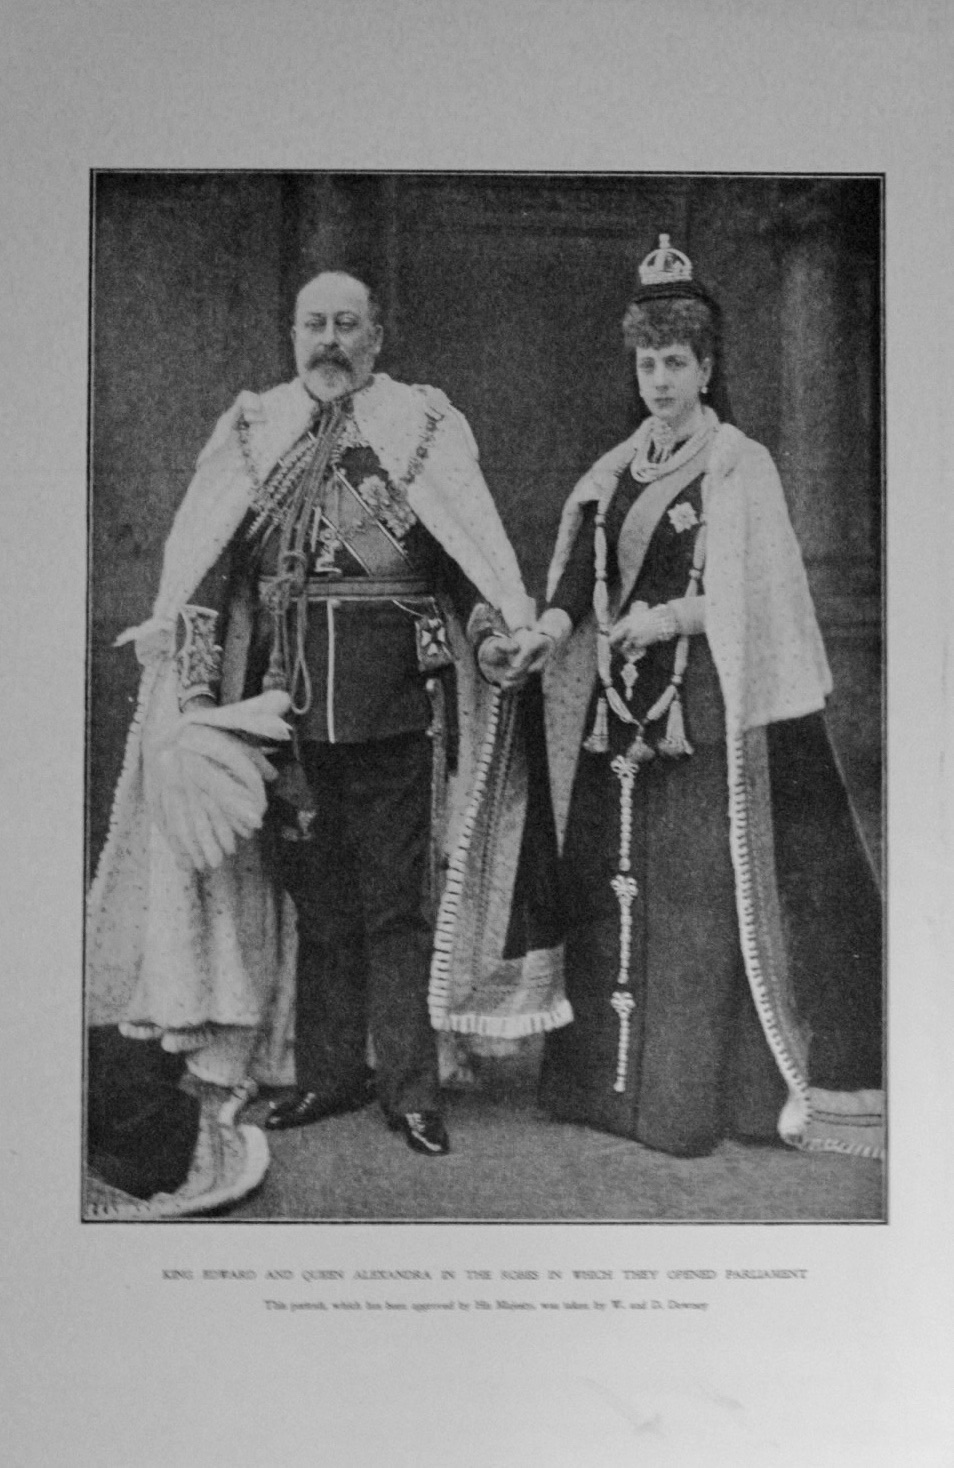 King Edward and Queen Alexandra in their Robes - 1901